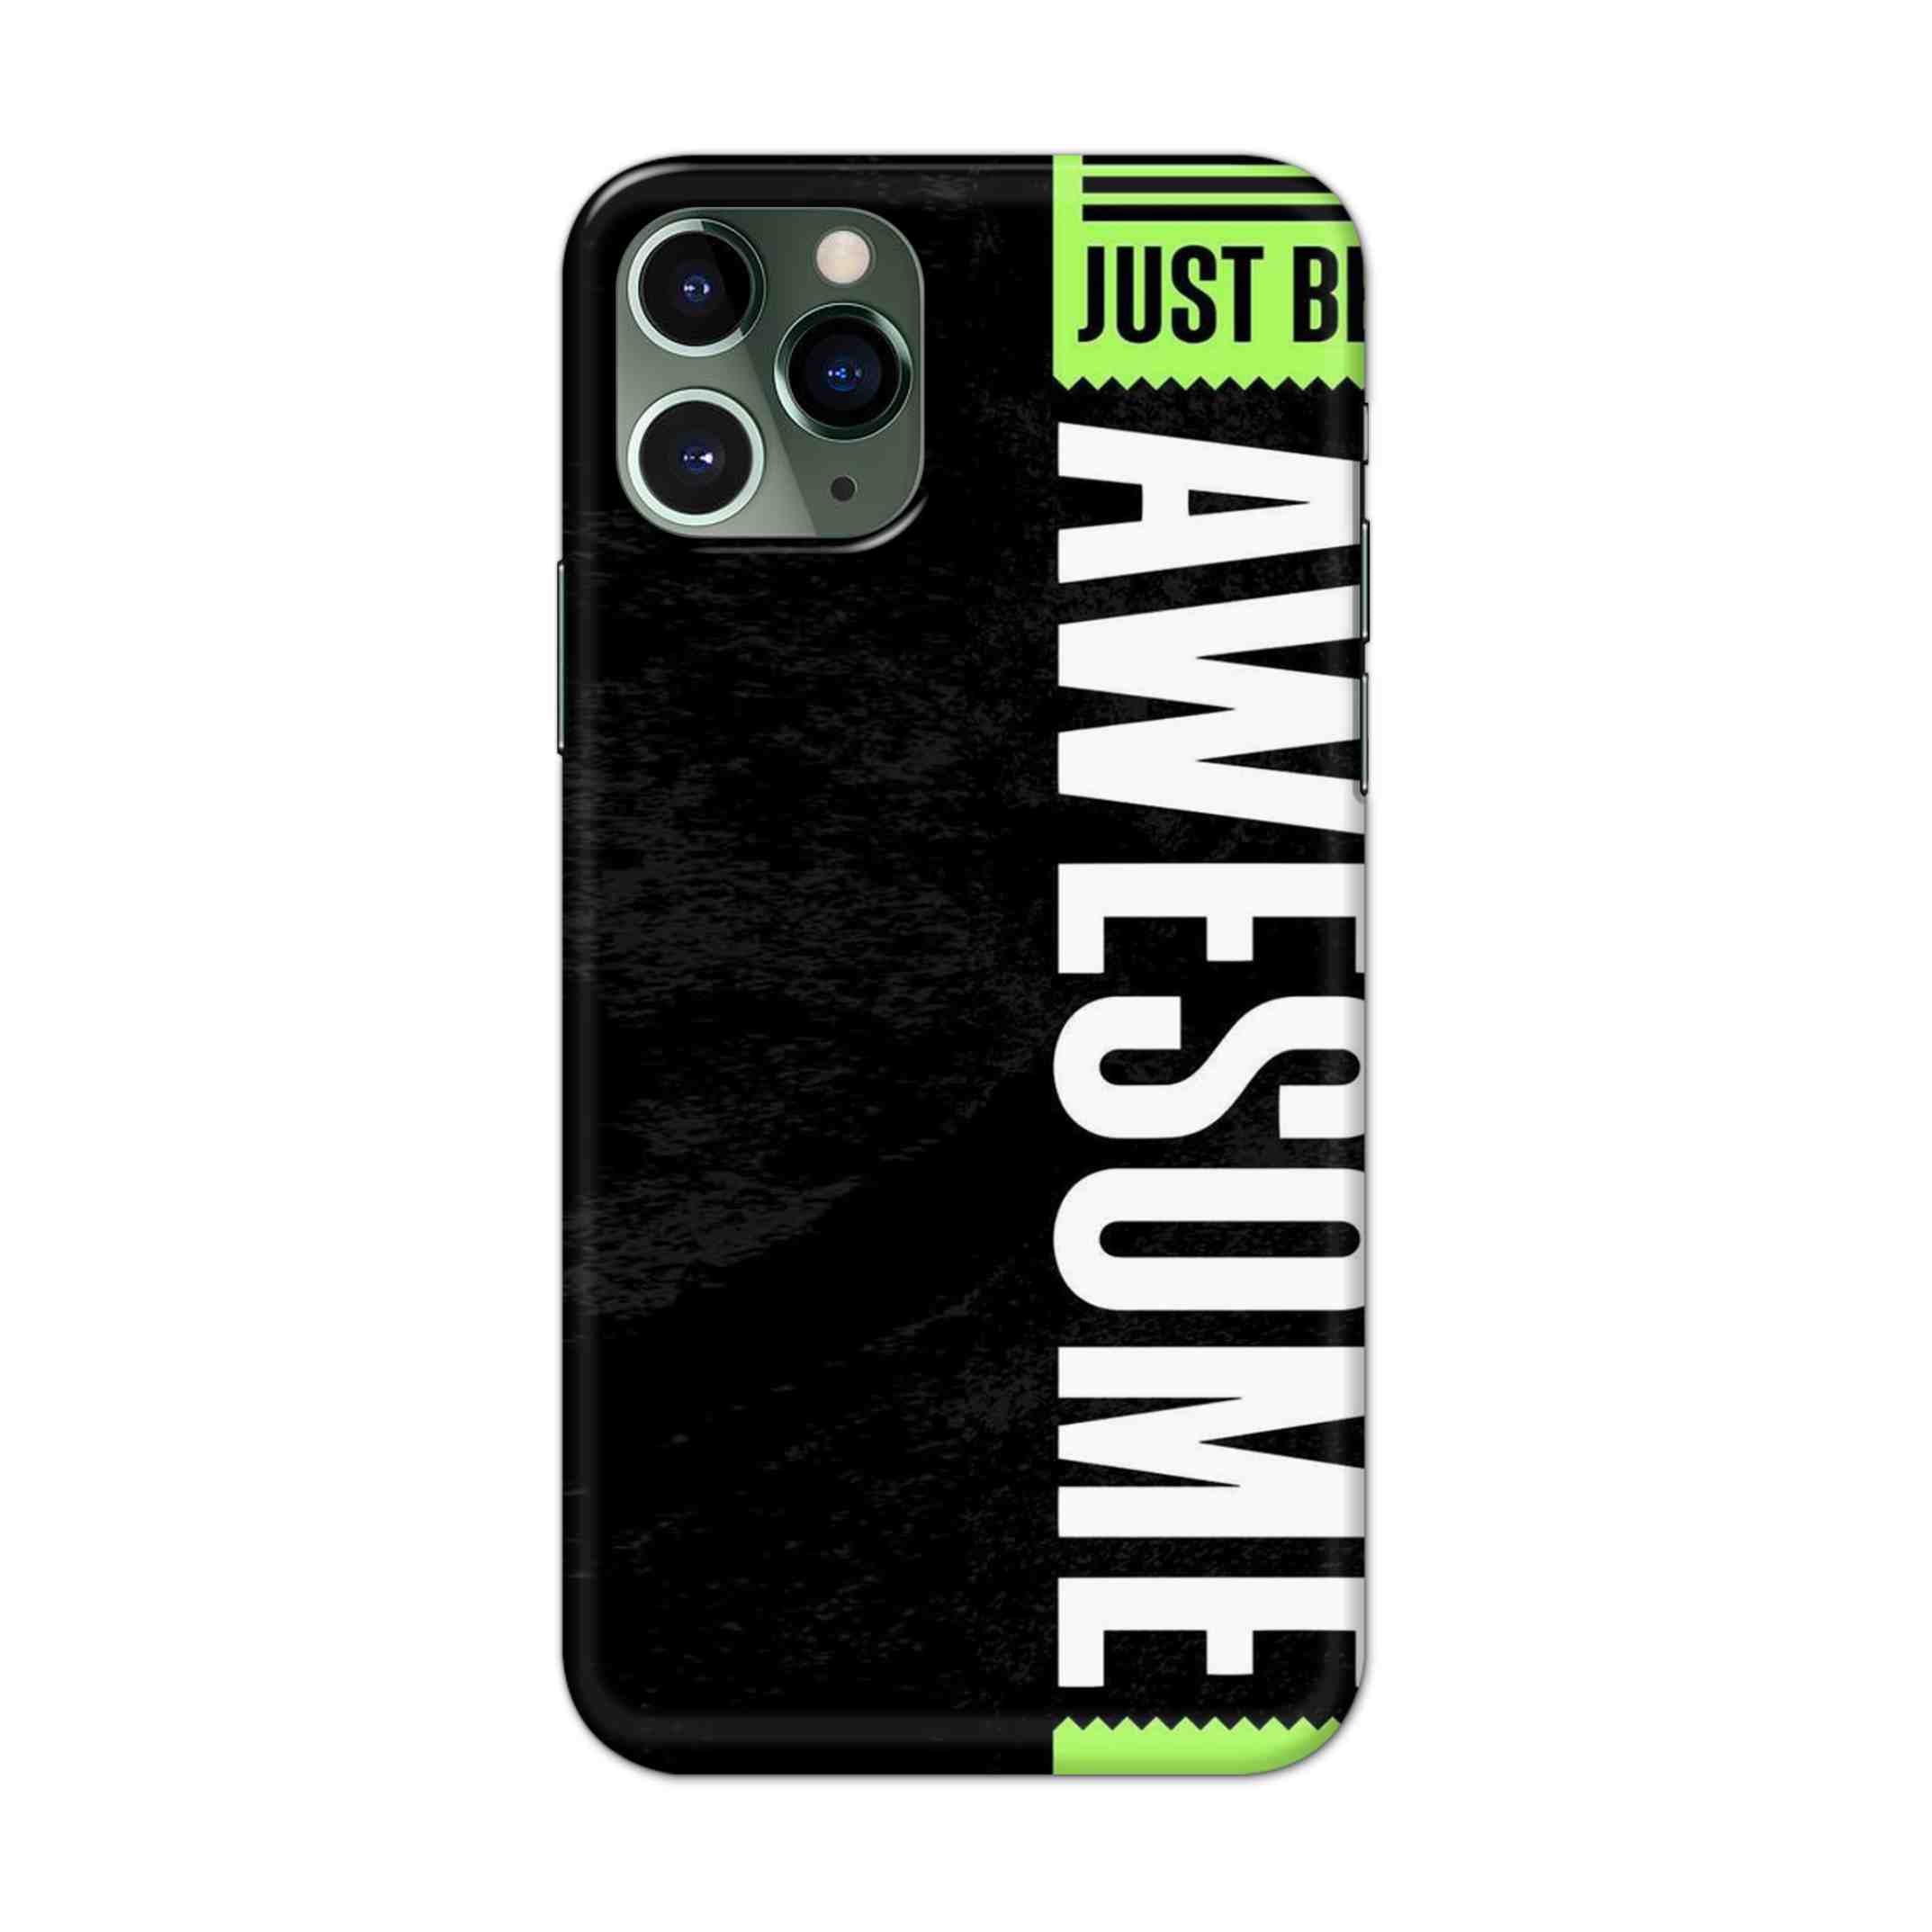 Buy Awesome Street Hard Back Mobile Phone Case/Cover For iPhone 11 Pro Max Online